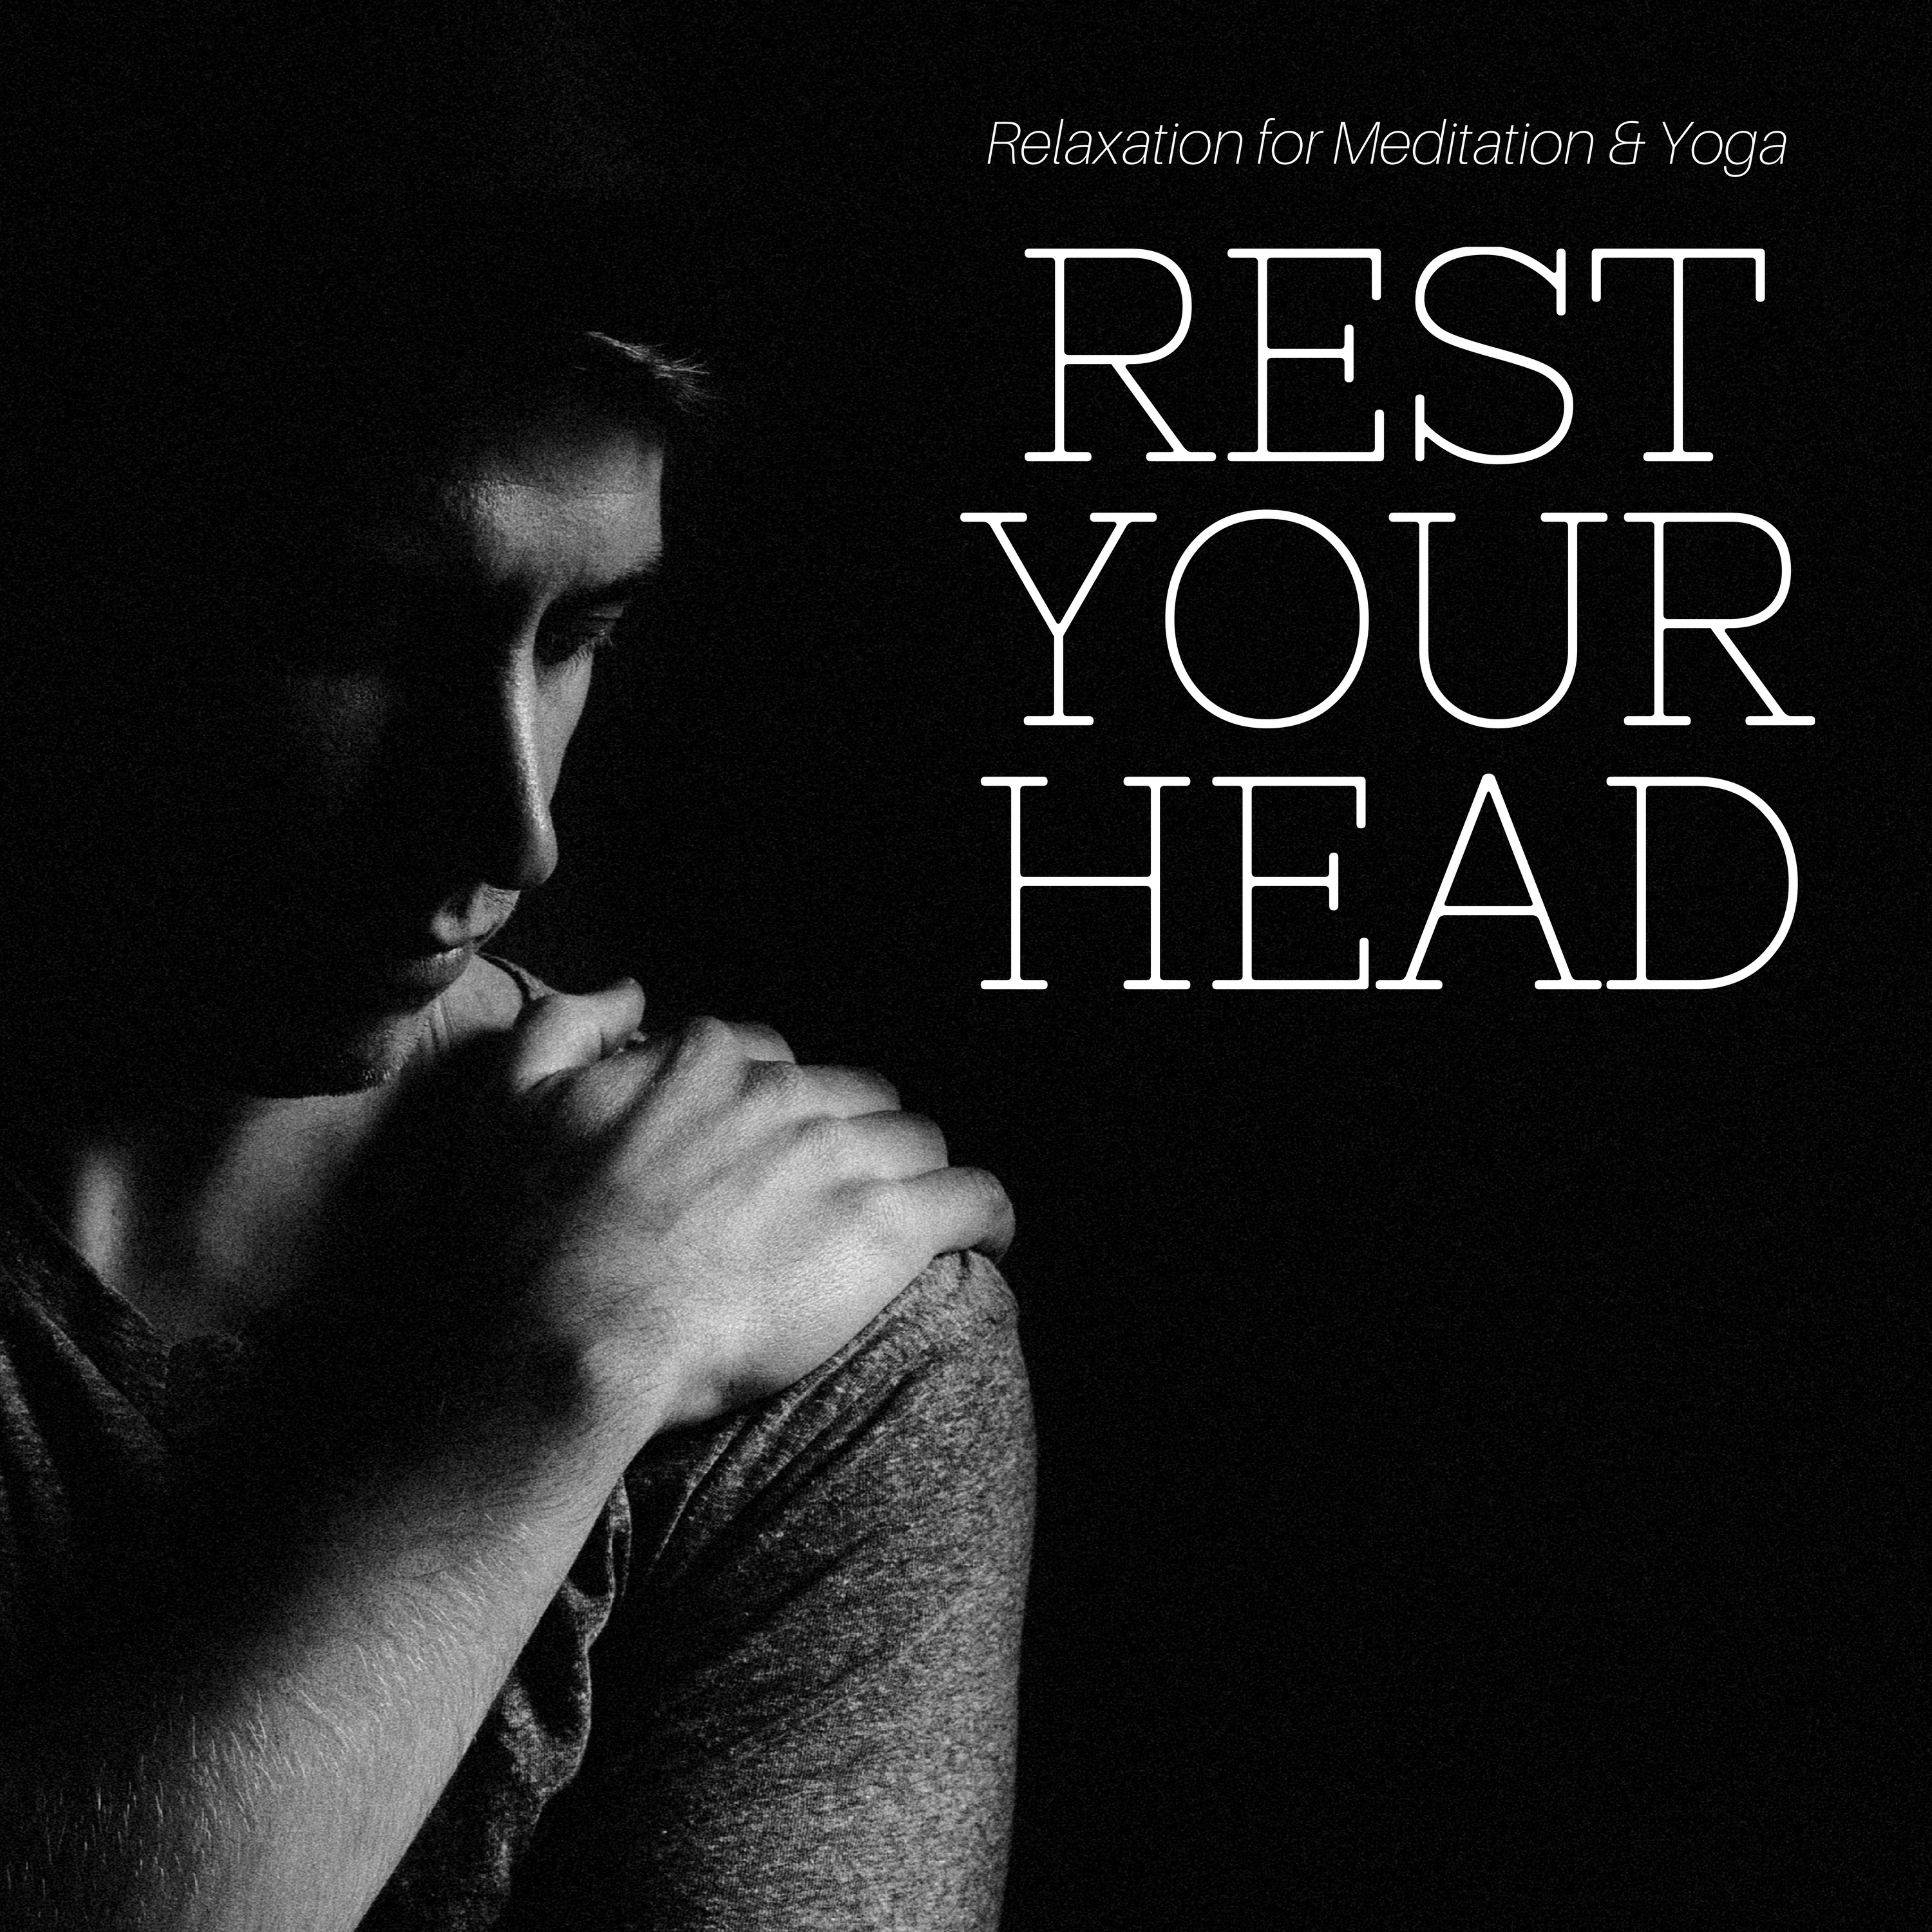 Rest Your Head - Relaxation for Meditation & Yoga, Music for Relaxing Time, Restorative Sleep